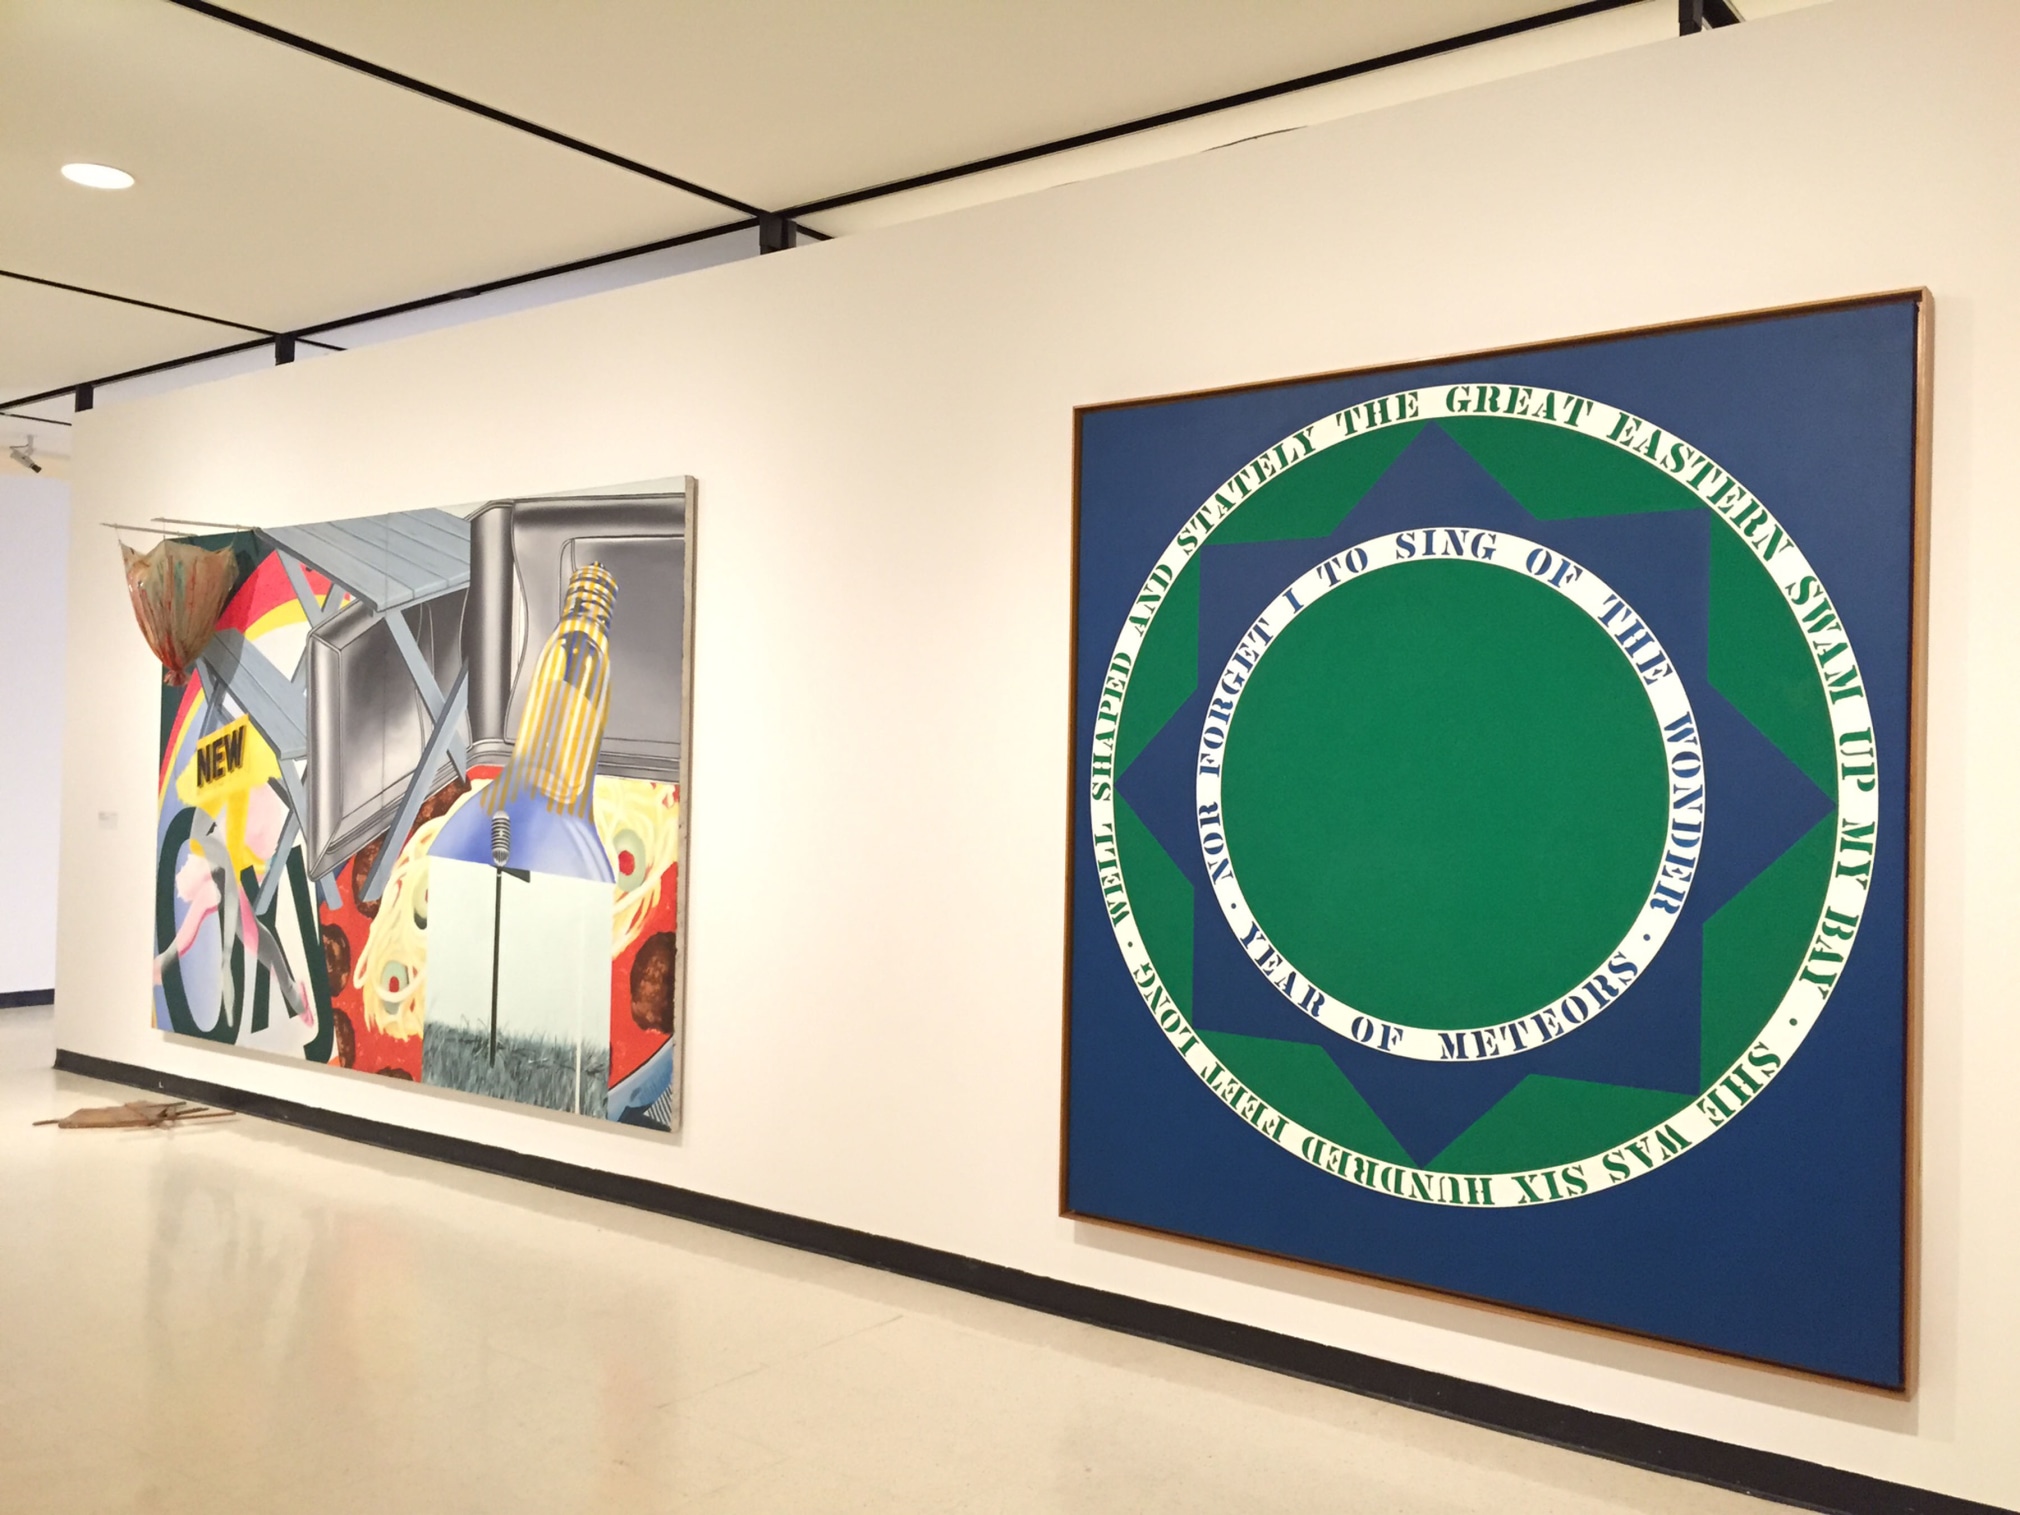 2016 installation view of the Albright-Knox Art Gallery&#039;s permanent collection, featuring Indiana&#039;s Year of Meteors&nbsp;(1961) and James Rosenquist&#039;s Nomad&nbsp;(1963). Image courtesy of the Albright-Knox Art Gallery, Buffalo, New York